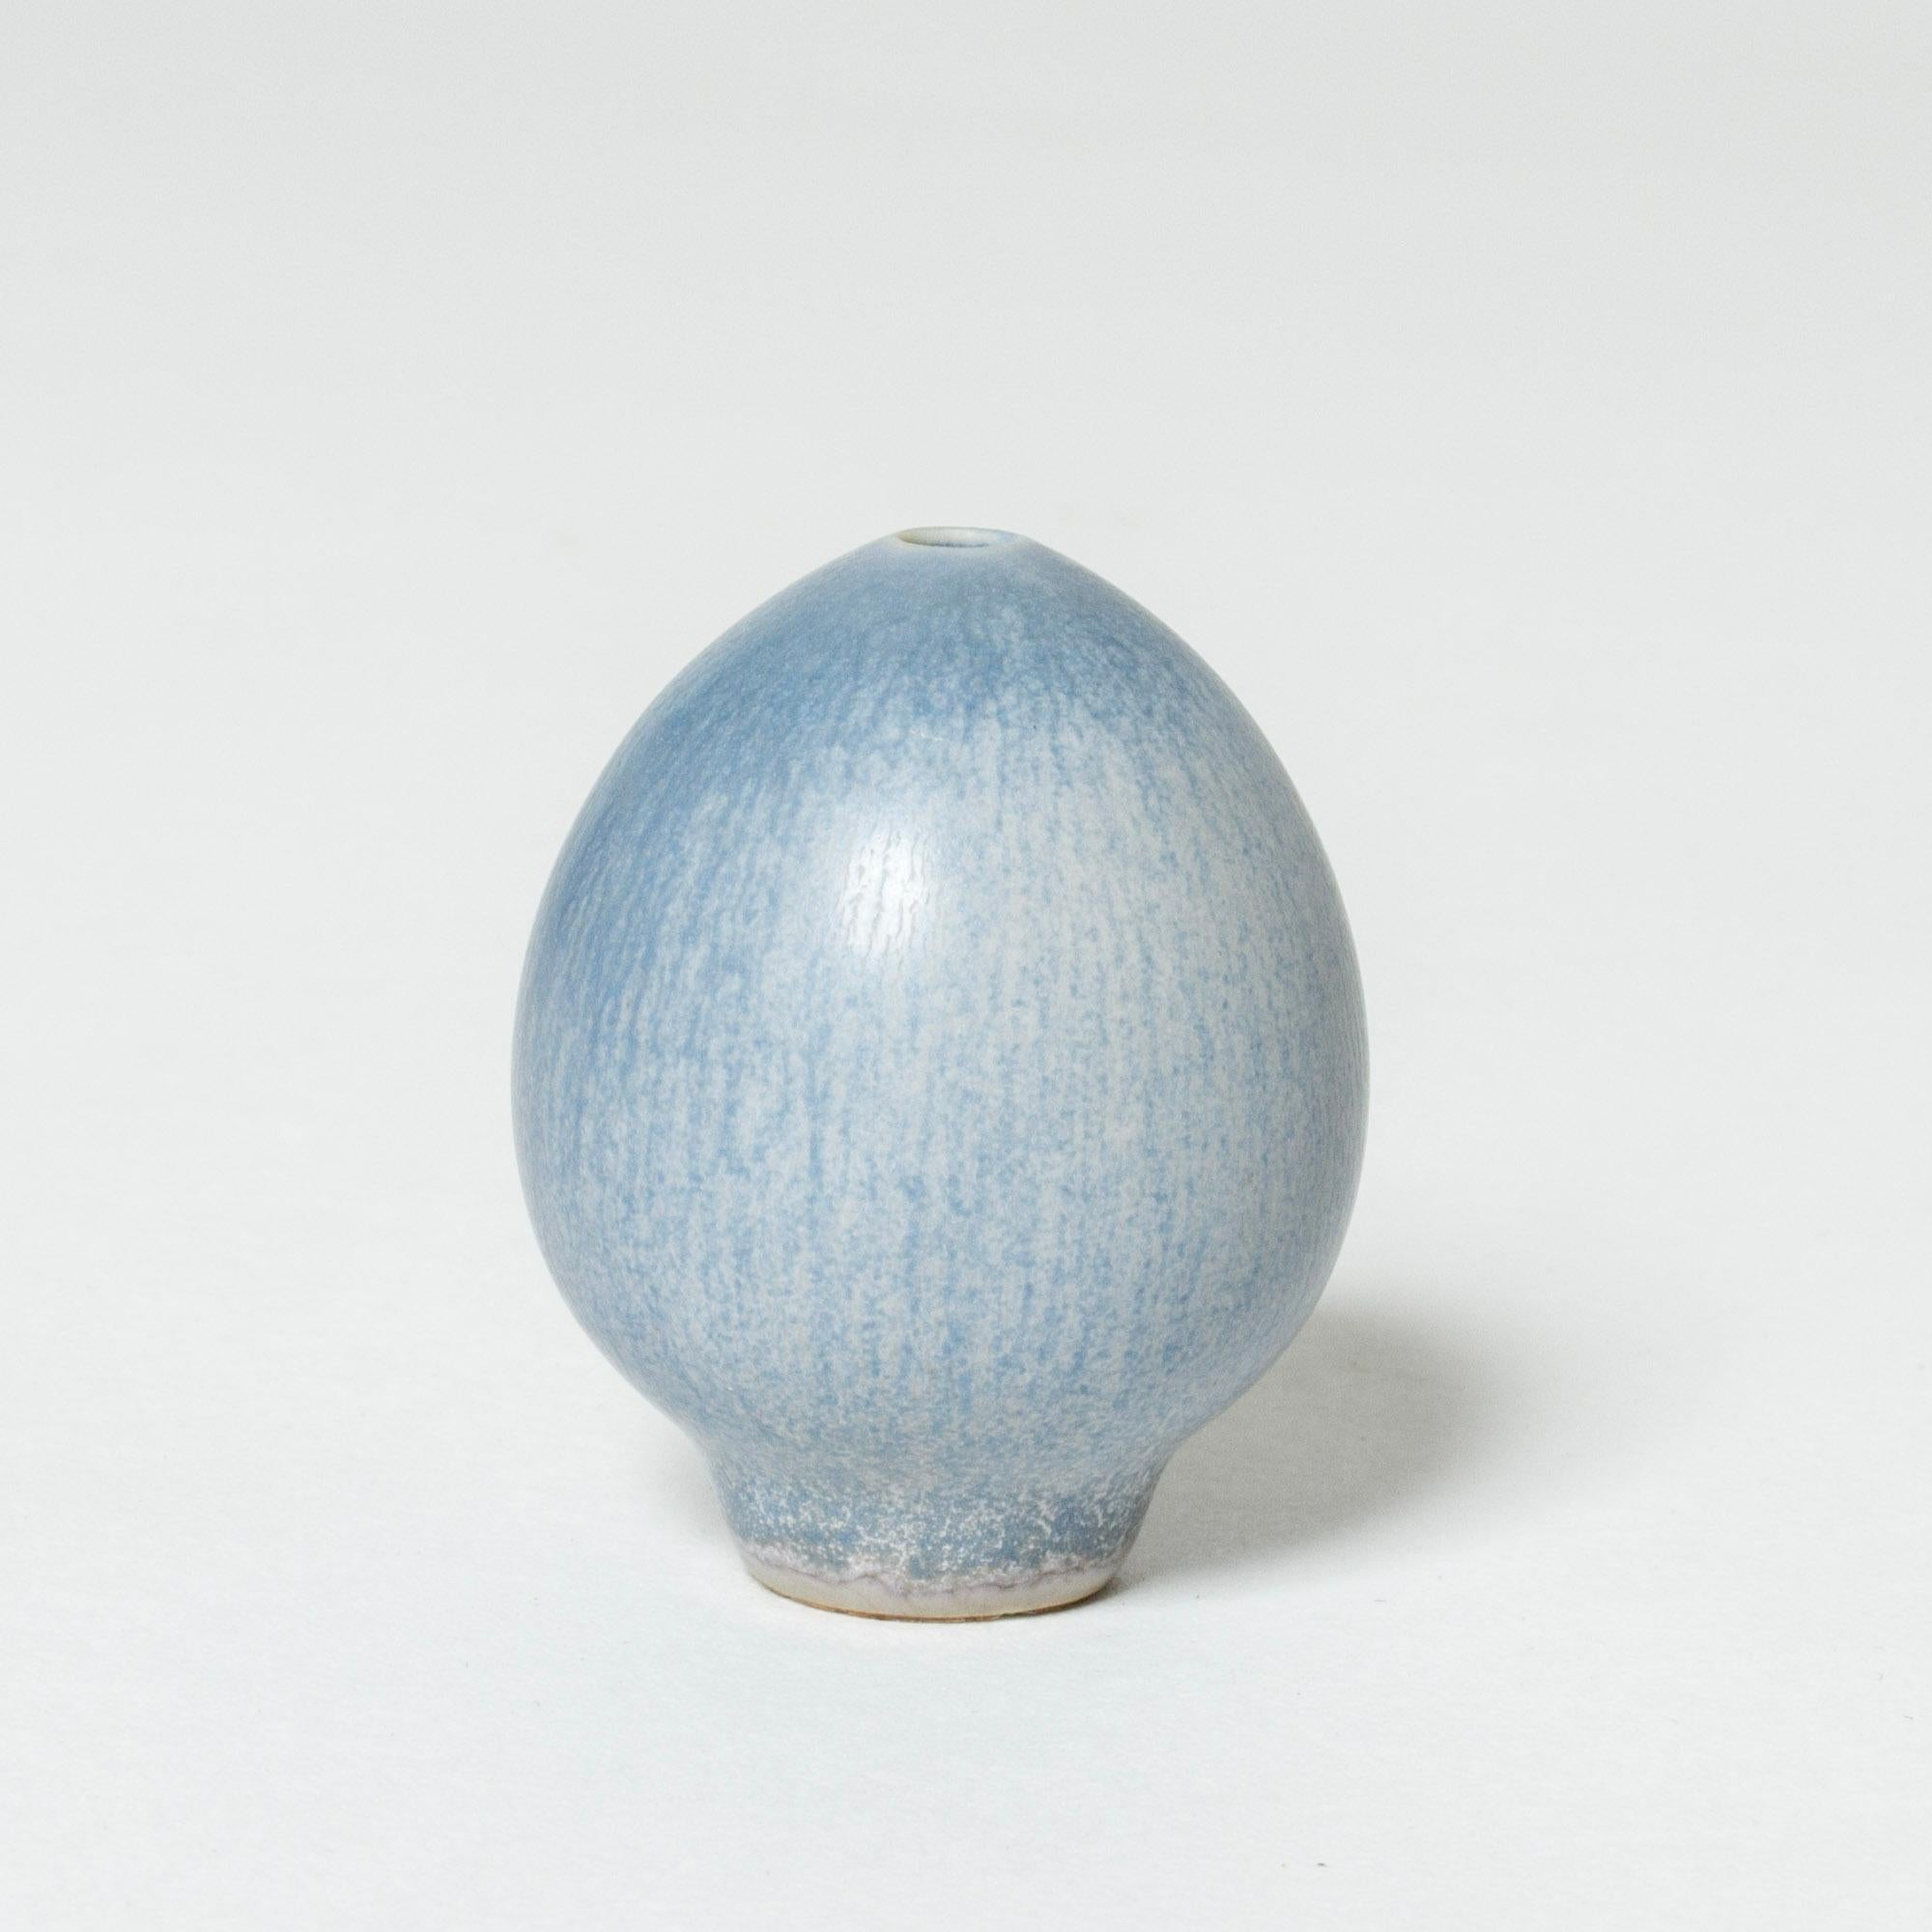 Tiny stoneware vase by Berndt Friberg, in the form of an egg. Smooth, icy blue hare’s fur glaze.

Berndt Friberg was a Swedish ceramicist, renowned for his stoneware vases and vessels for Gustavsberg. His pure, composed designs with satiny,